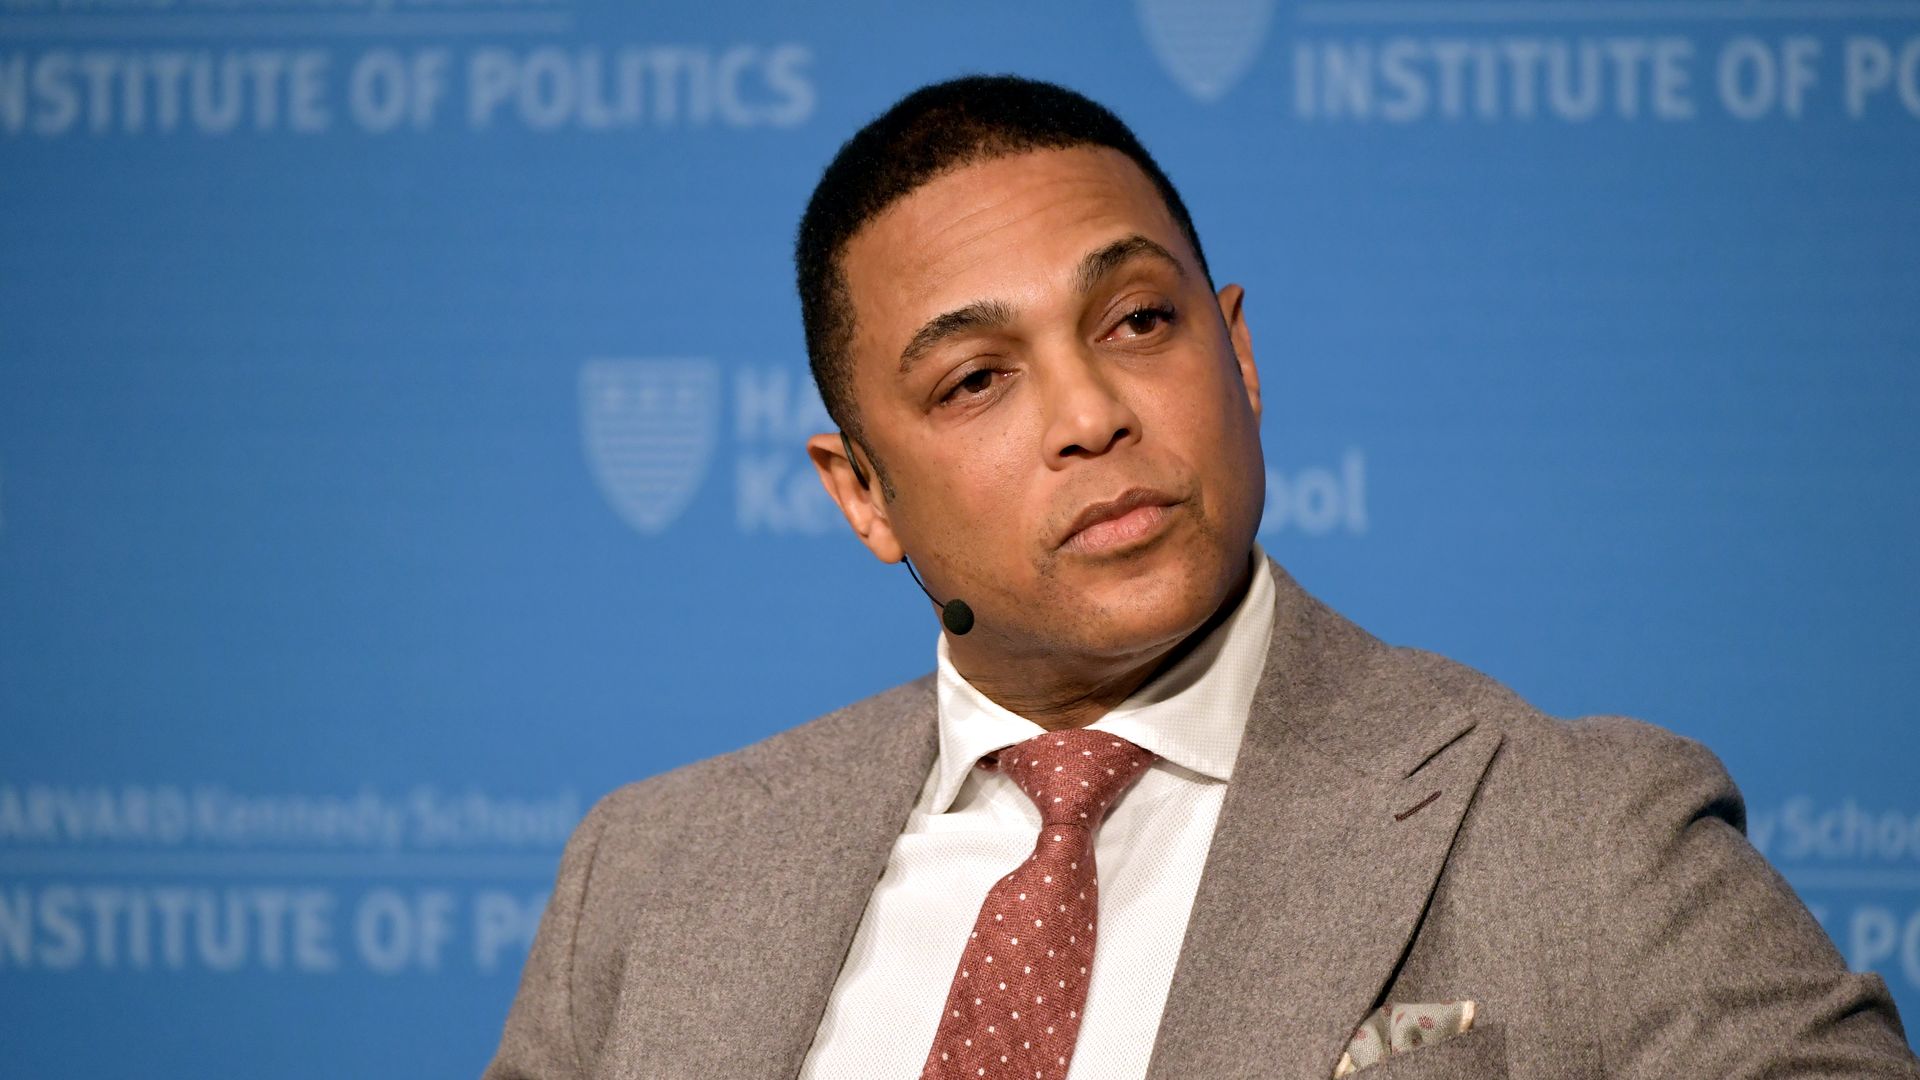 Don Lemon fired from CNN following allegations of misogyny | HELLO!